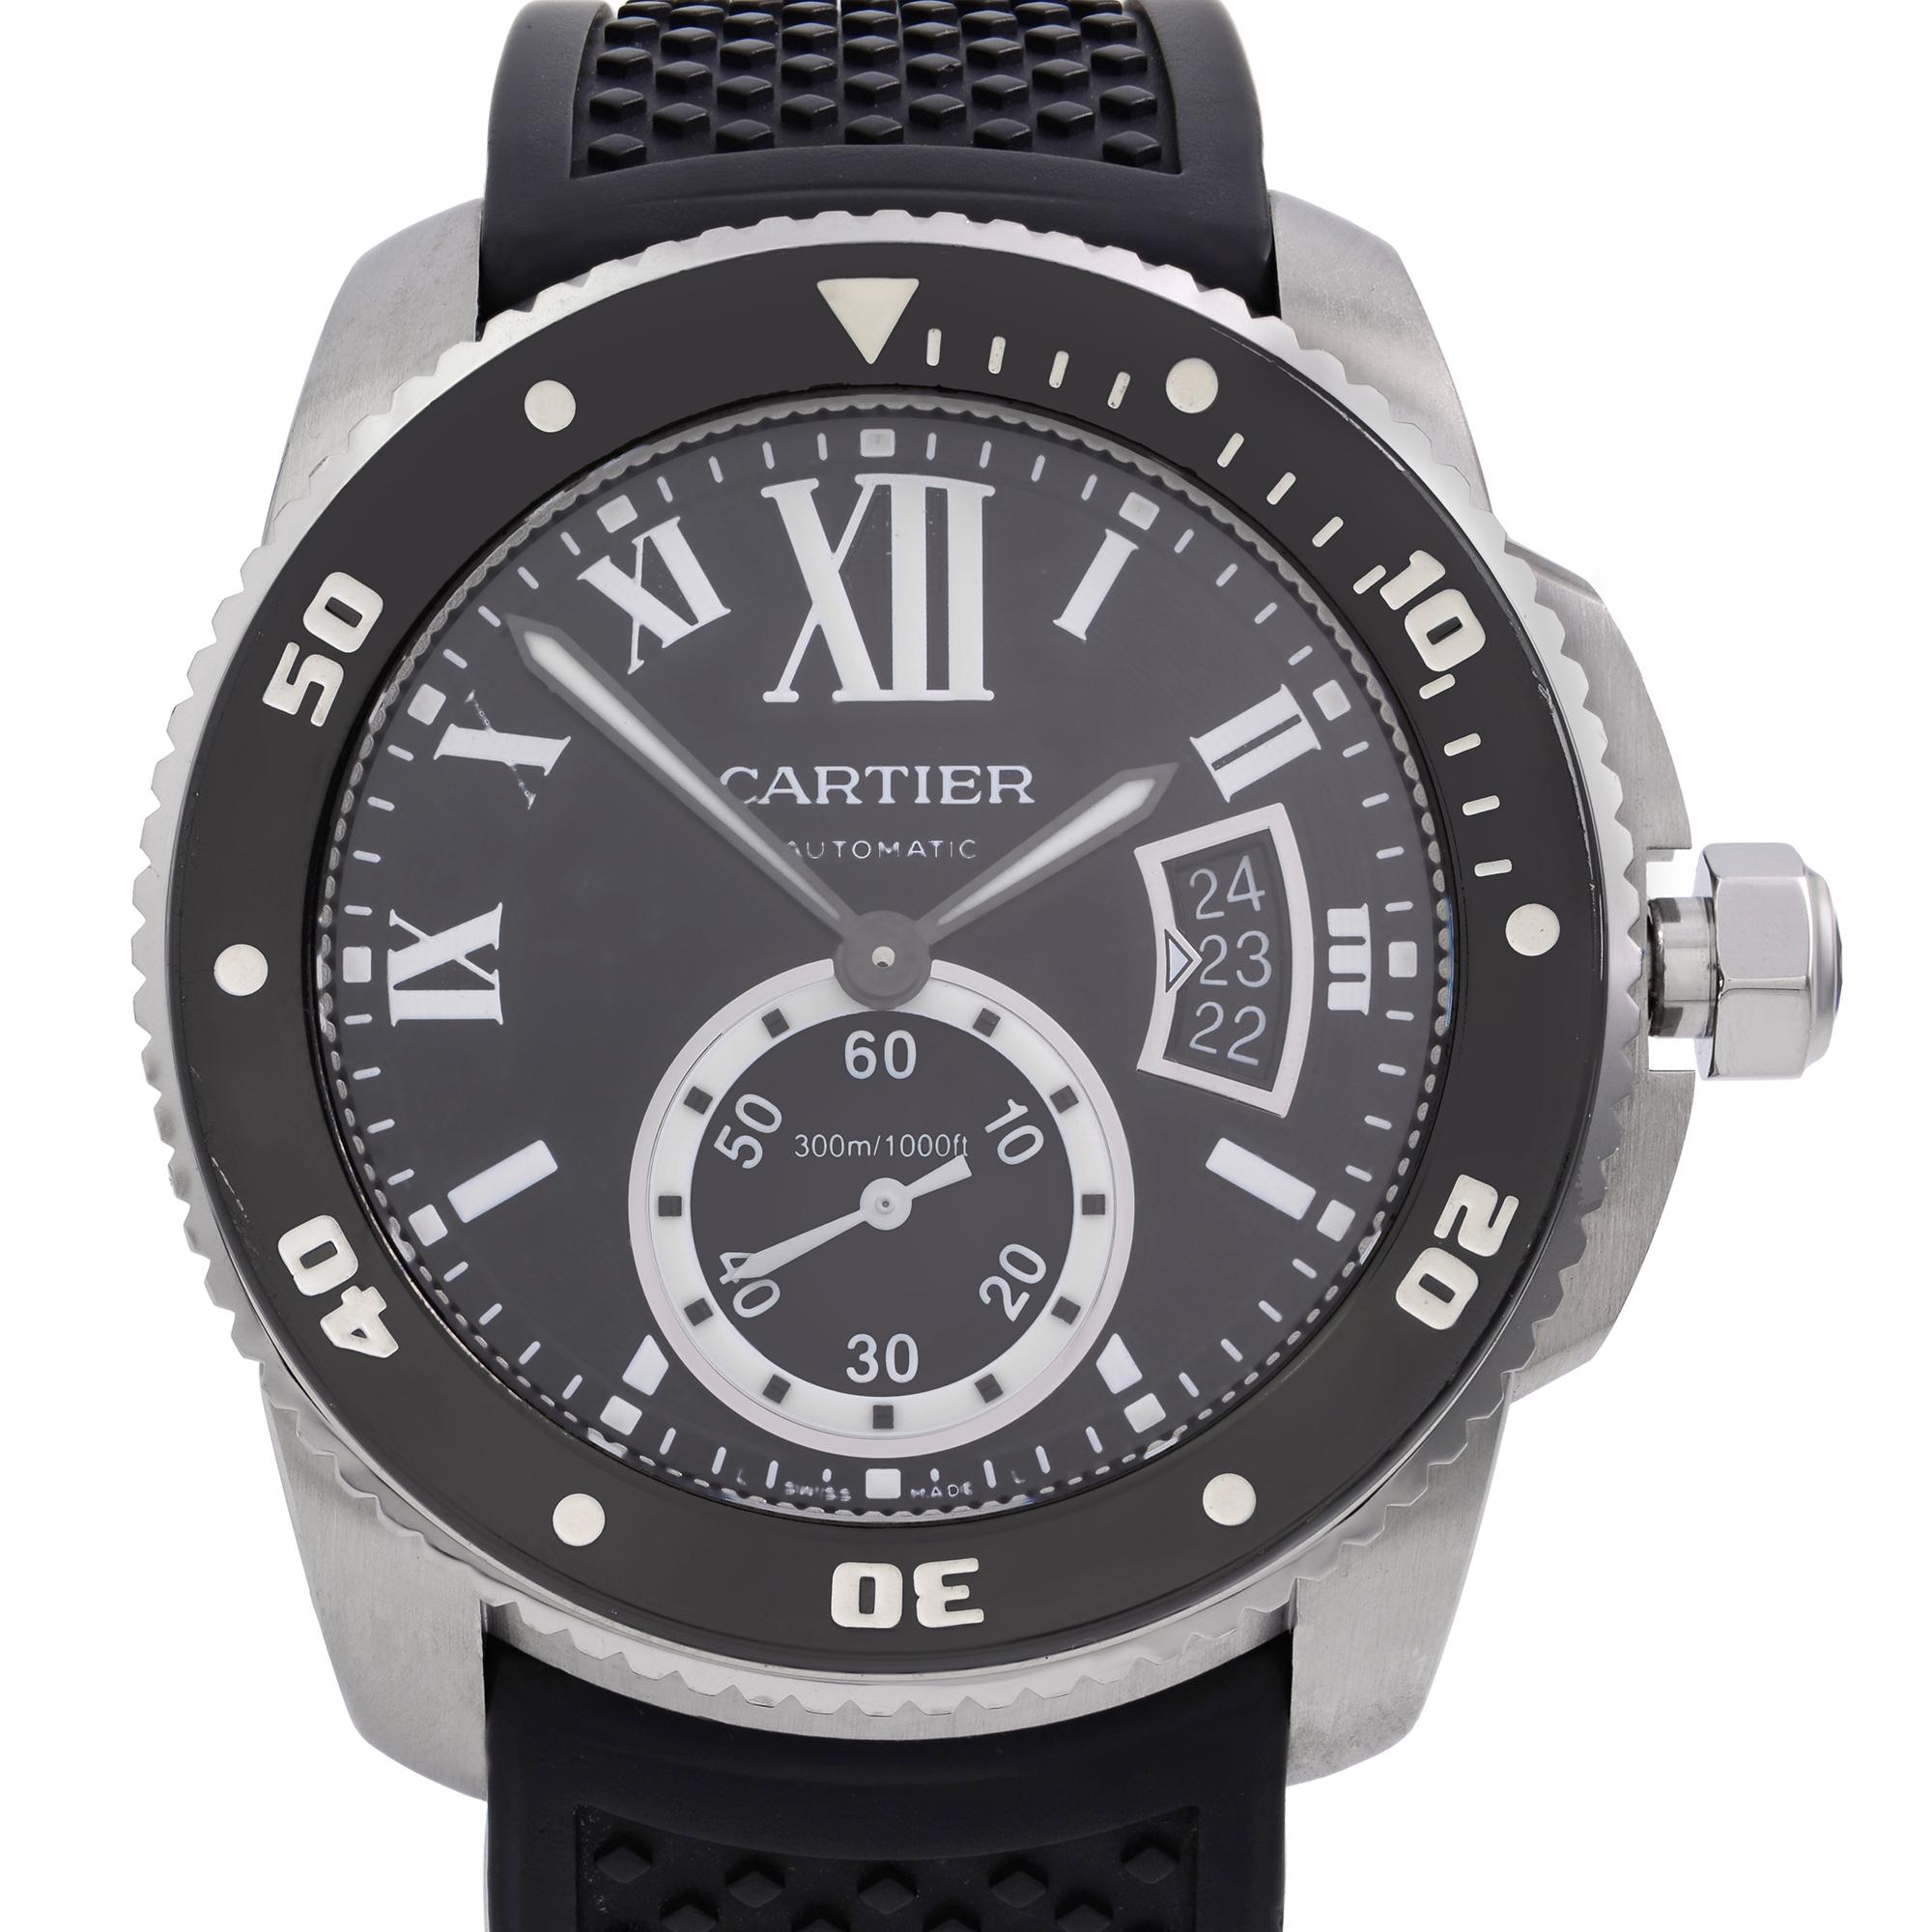 Pre-owned Cartier De Calibre Steel Rubber Black Roman Dial Automatic Men's Watch. The bezel of this watch has minor blemishes on the bezel as visible in pictures. Comes with Manufacturer Box and Papers. Backed by a 1-year warranty provided by